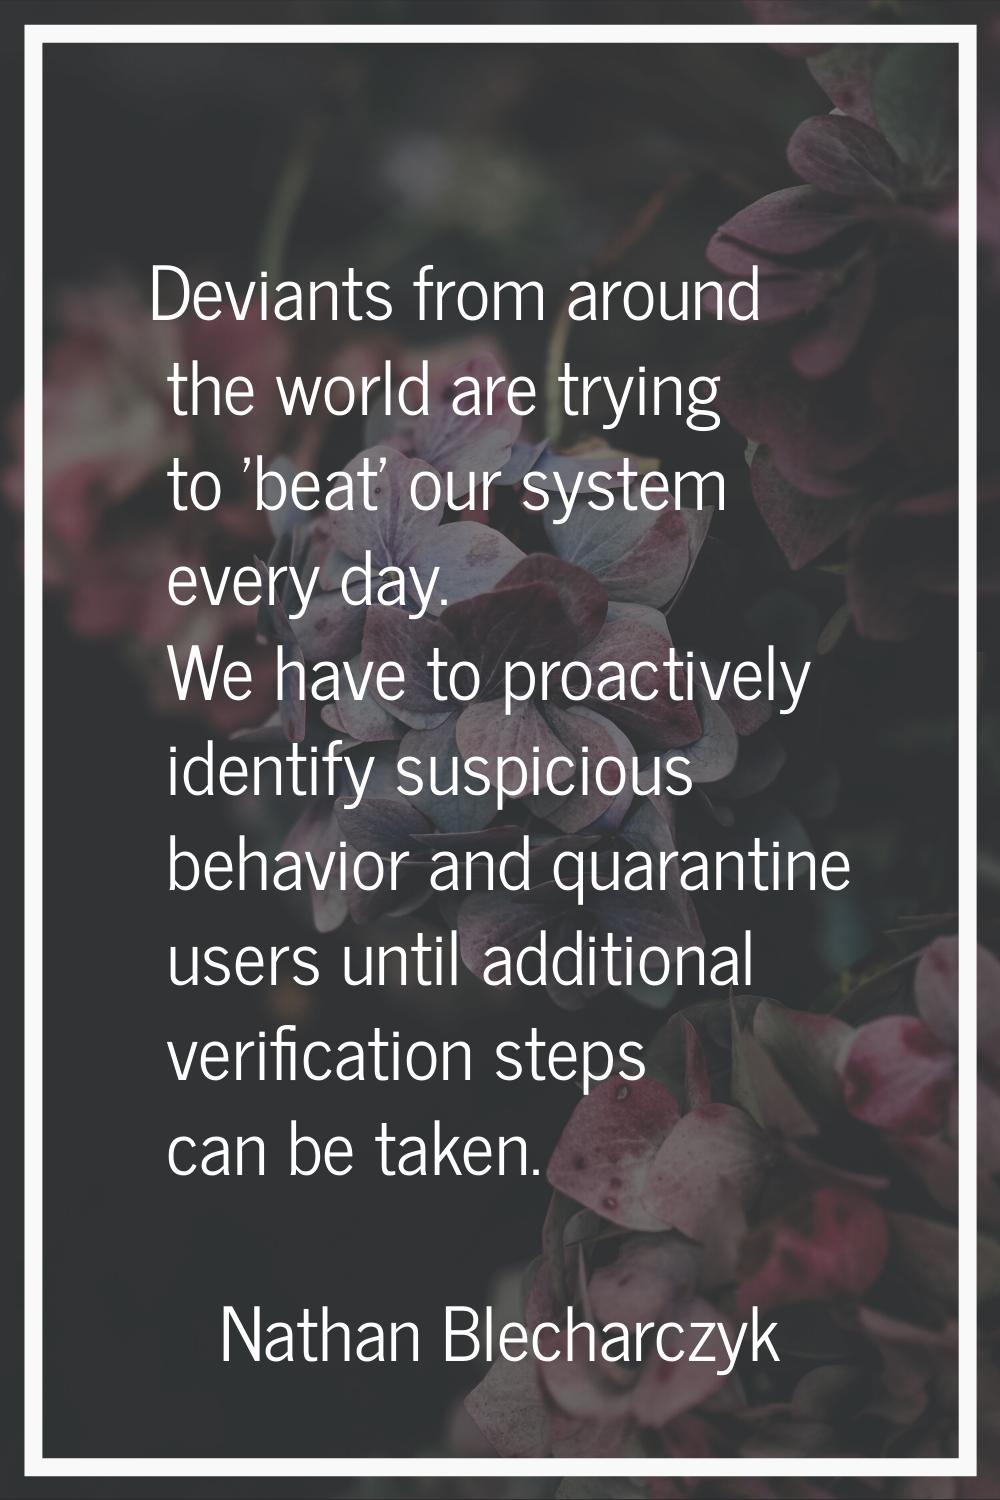 Deviants from around the world are trying to 'beat' our system every day. We have to proactively id